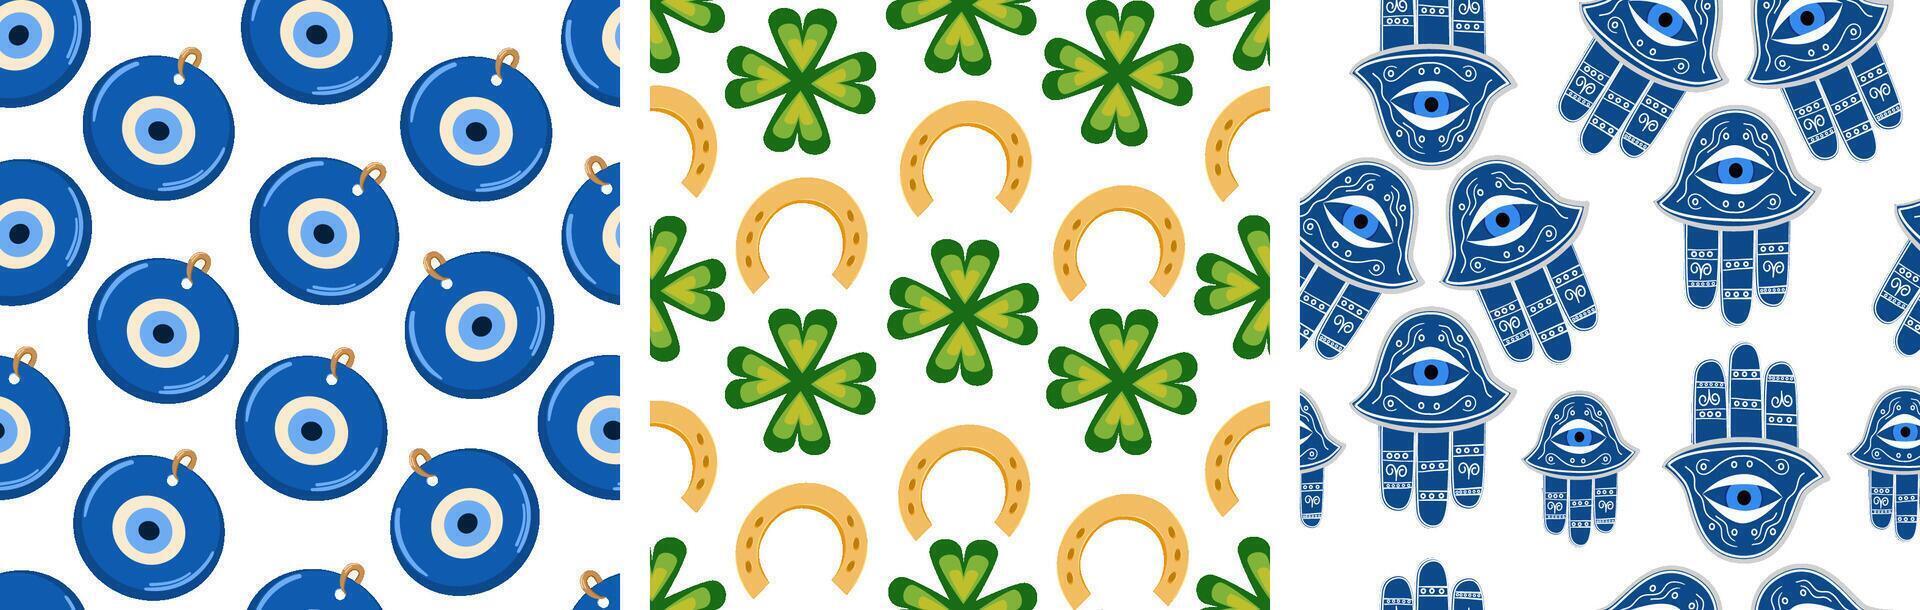 Vector illustrations seamless pattern - symbols of good luck. Nazar amulet, four-leaf clover and horseshoe, hamsa amulet. Vector illustration